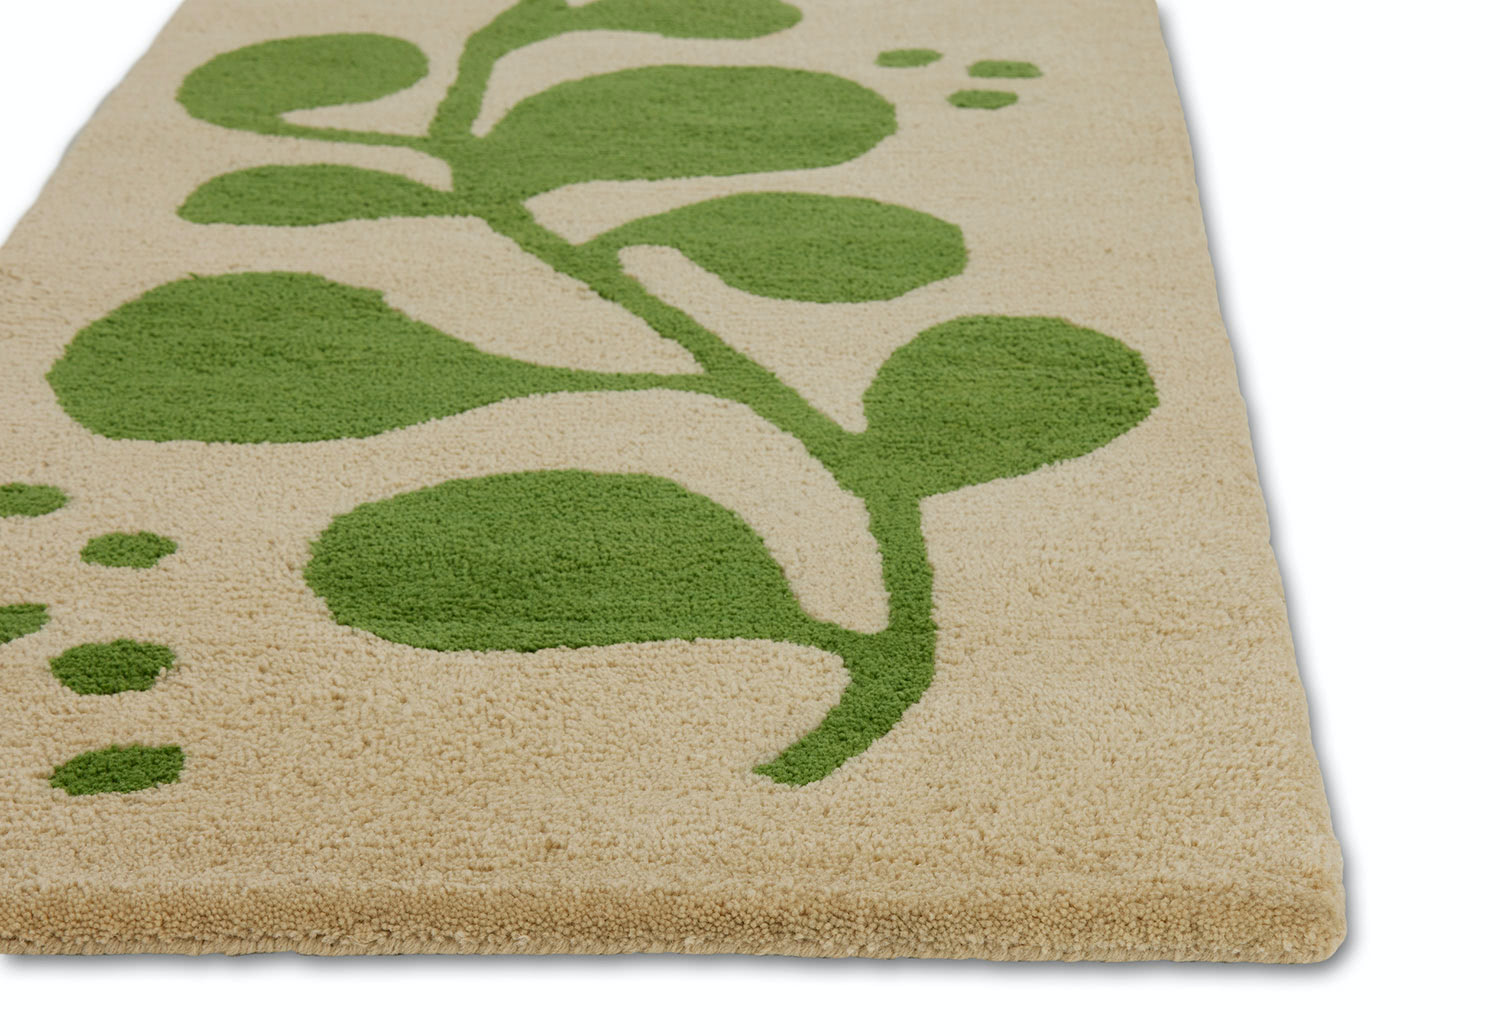 A corner detail of a neutral and green area rug with abstract designs on it called Vine Mambo